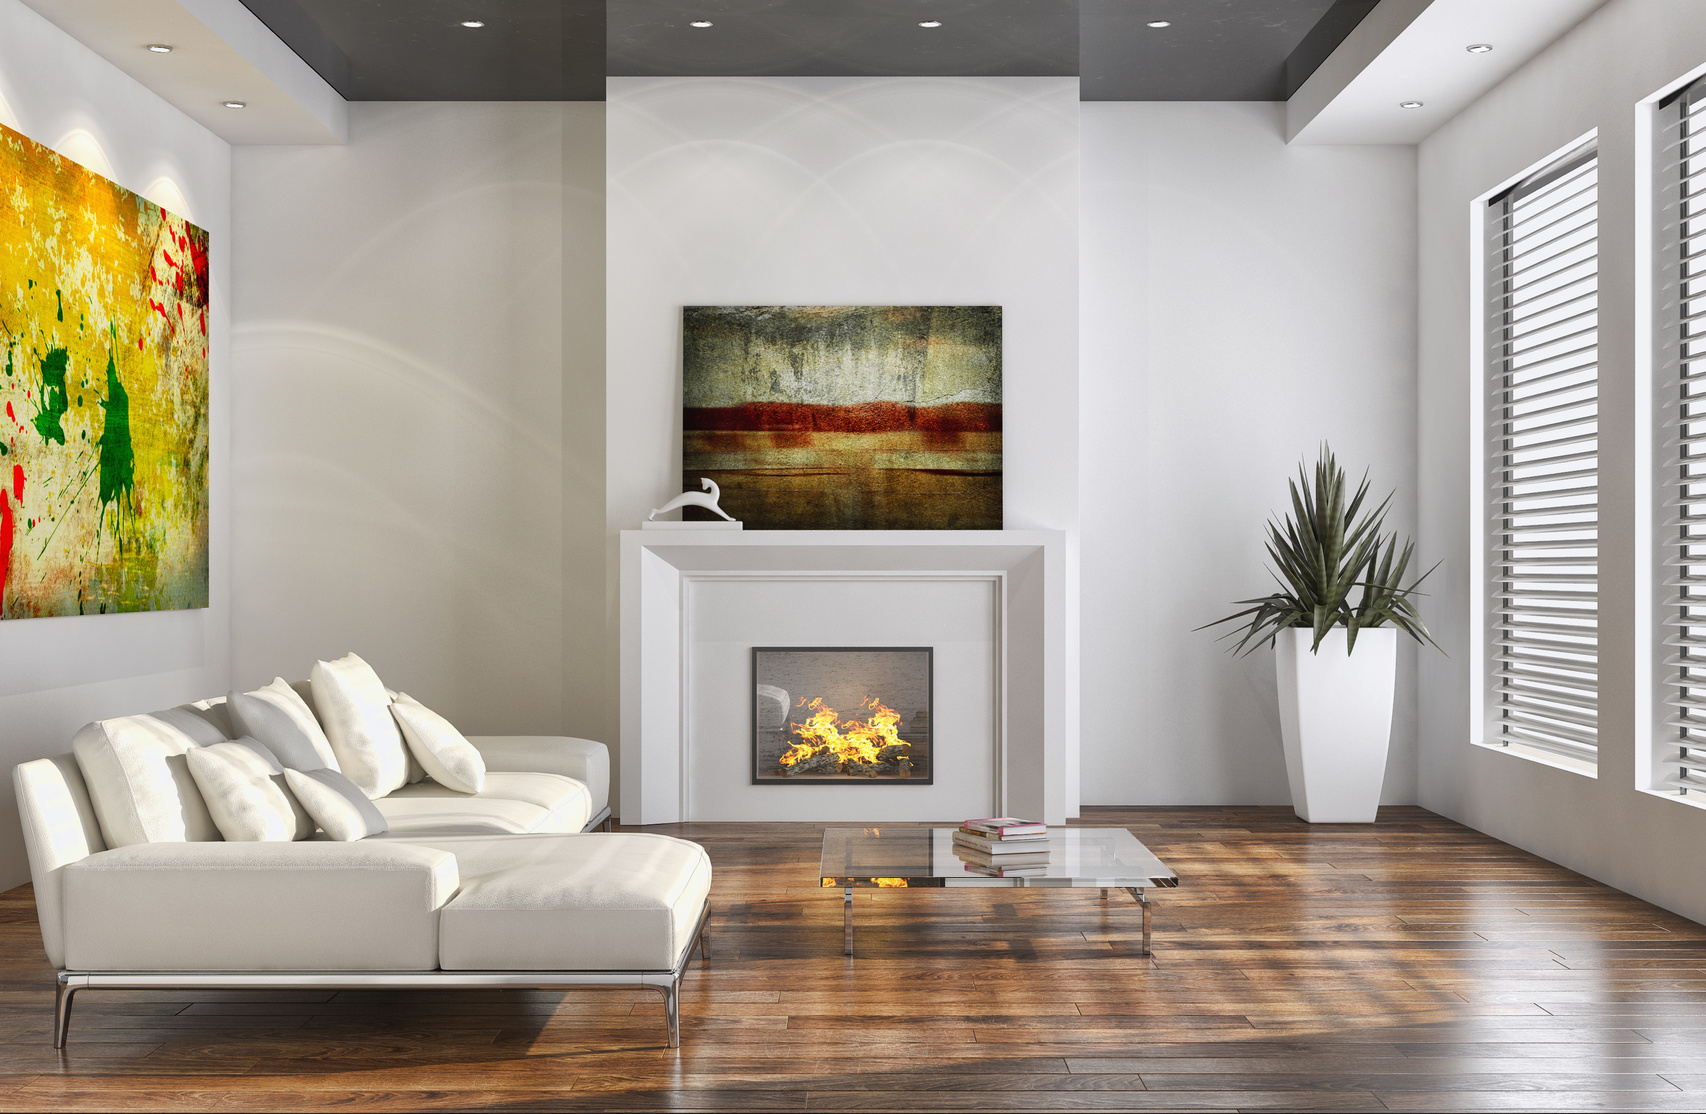 Stay Warm and Cozy With These Fireplace Safety Tips